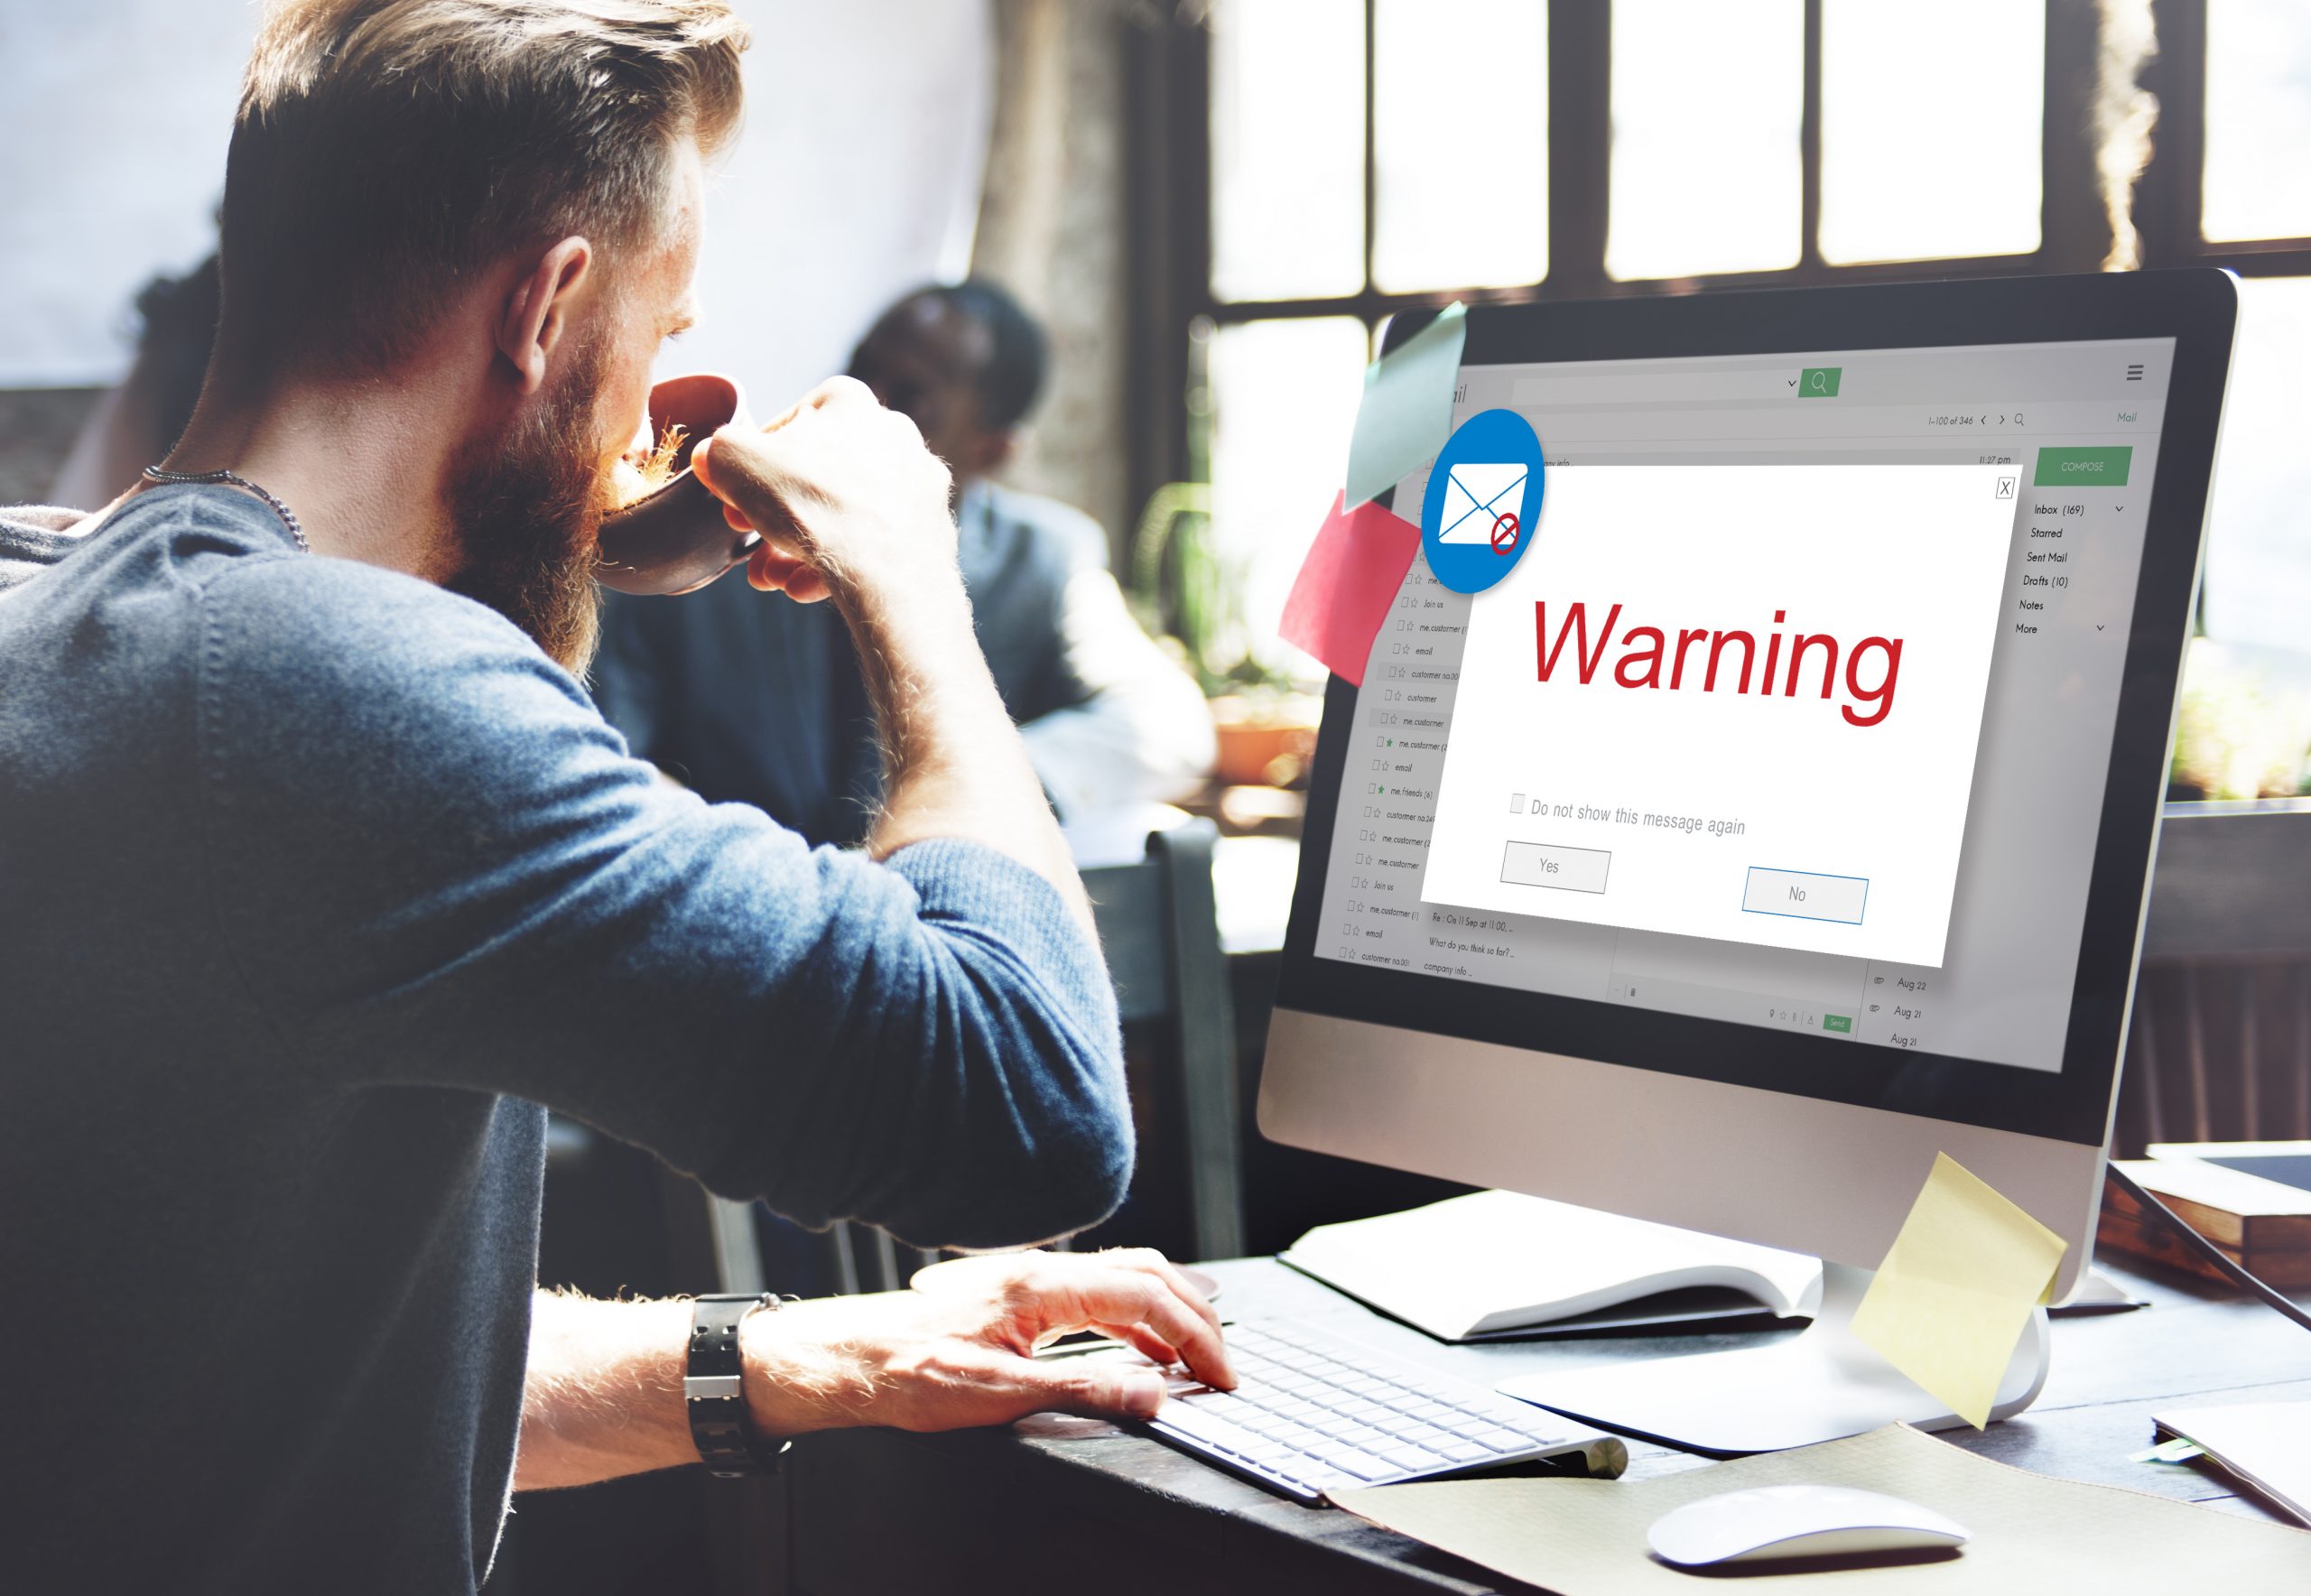 A man drinking coffee at his desk in an office when a warning pop up comes up on his computer screen. Image licensed through Adobe Stock.